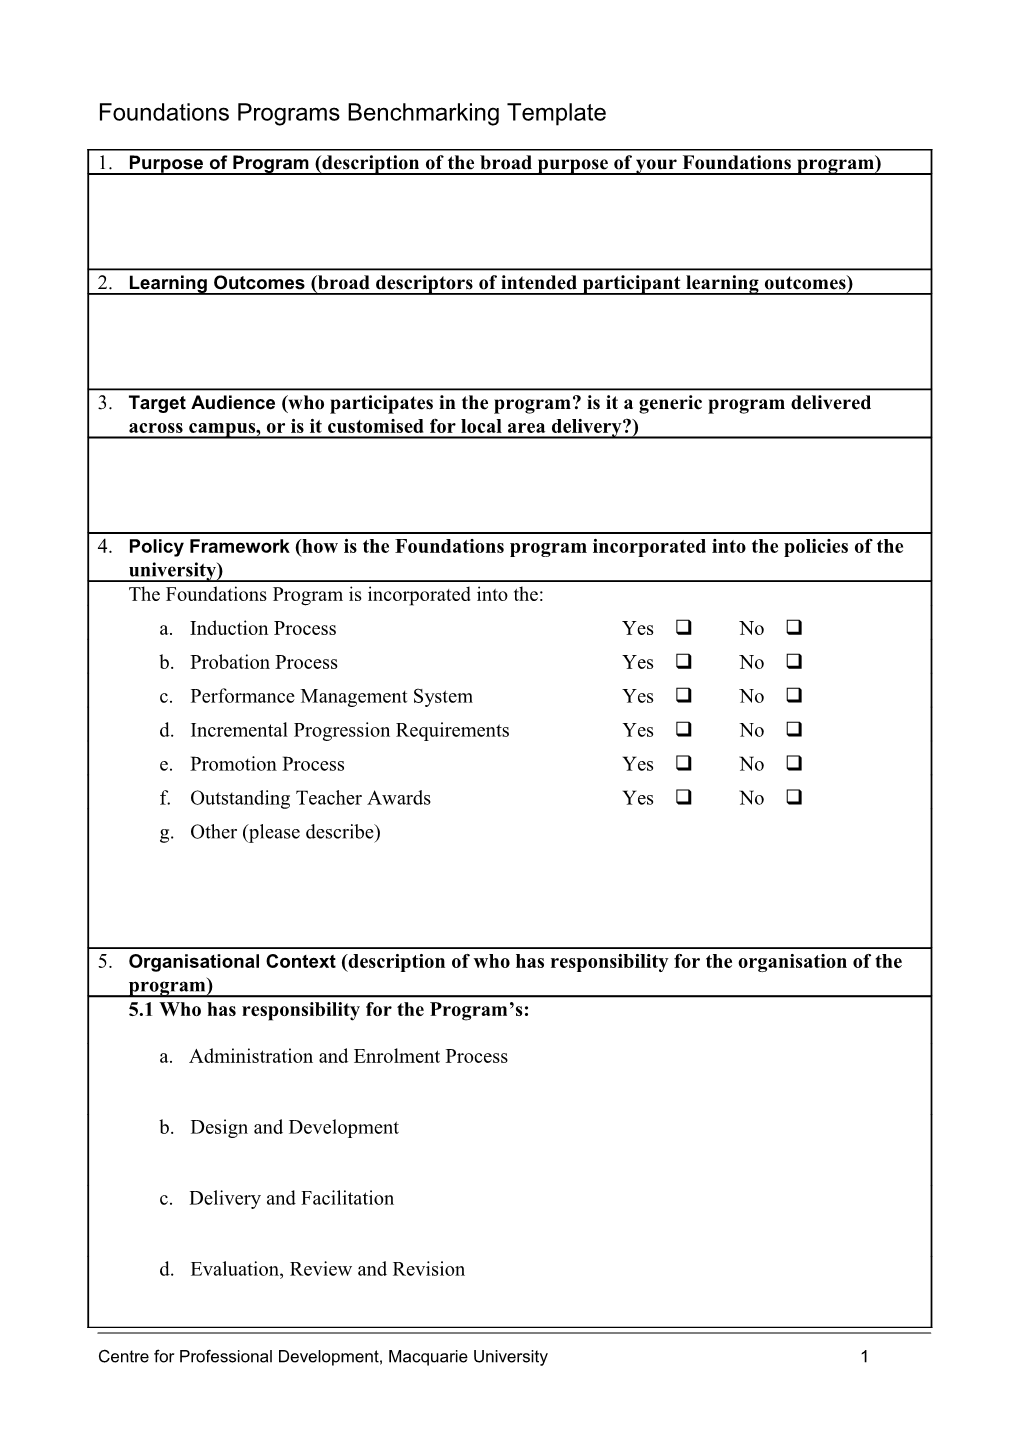 Foundations Programs Benchmarking Template